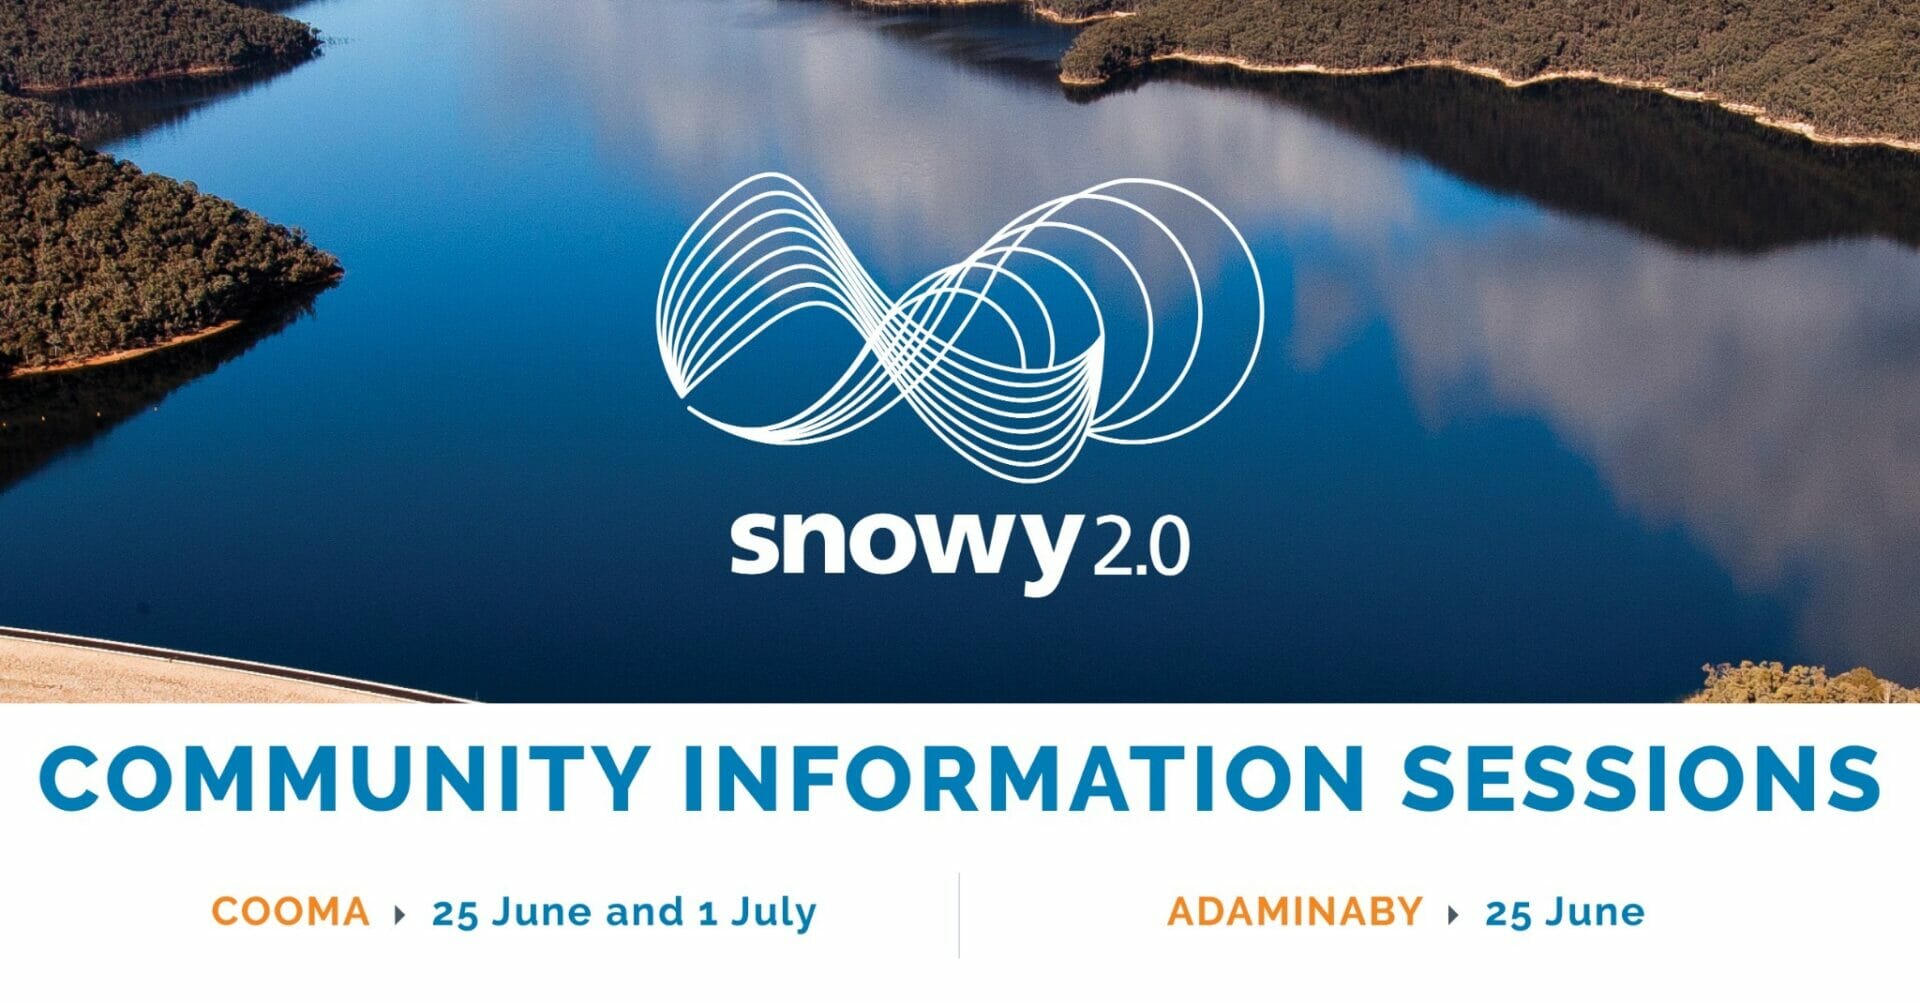 Snowy 2.0 information session